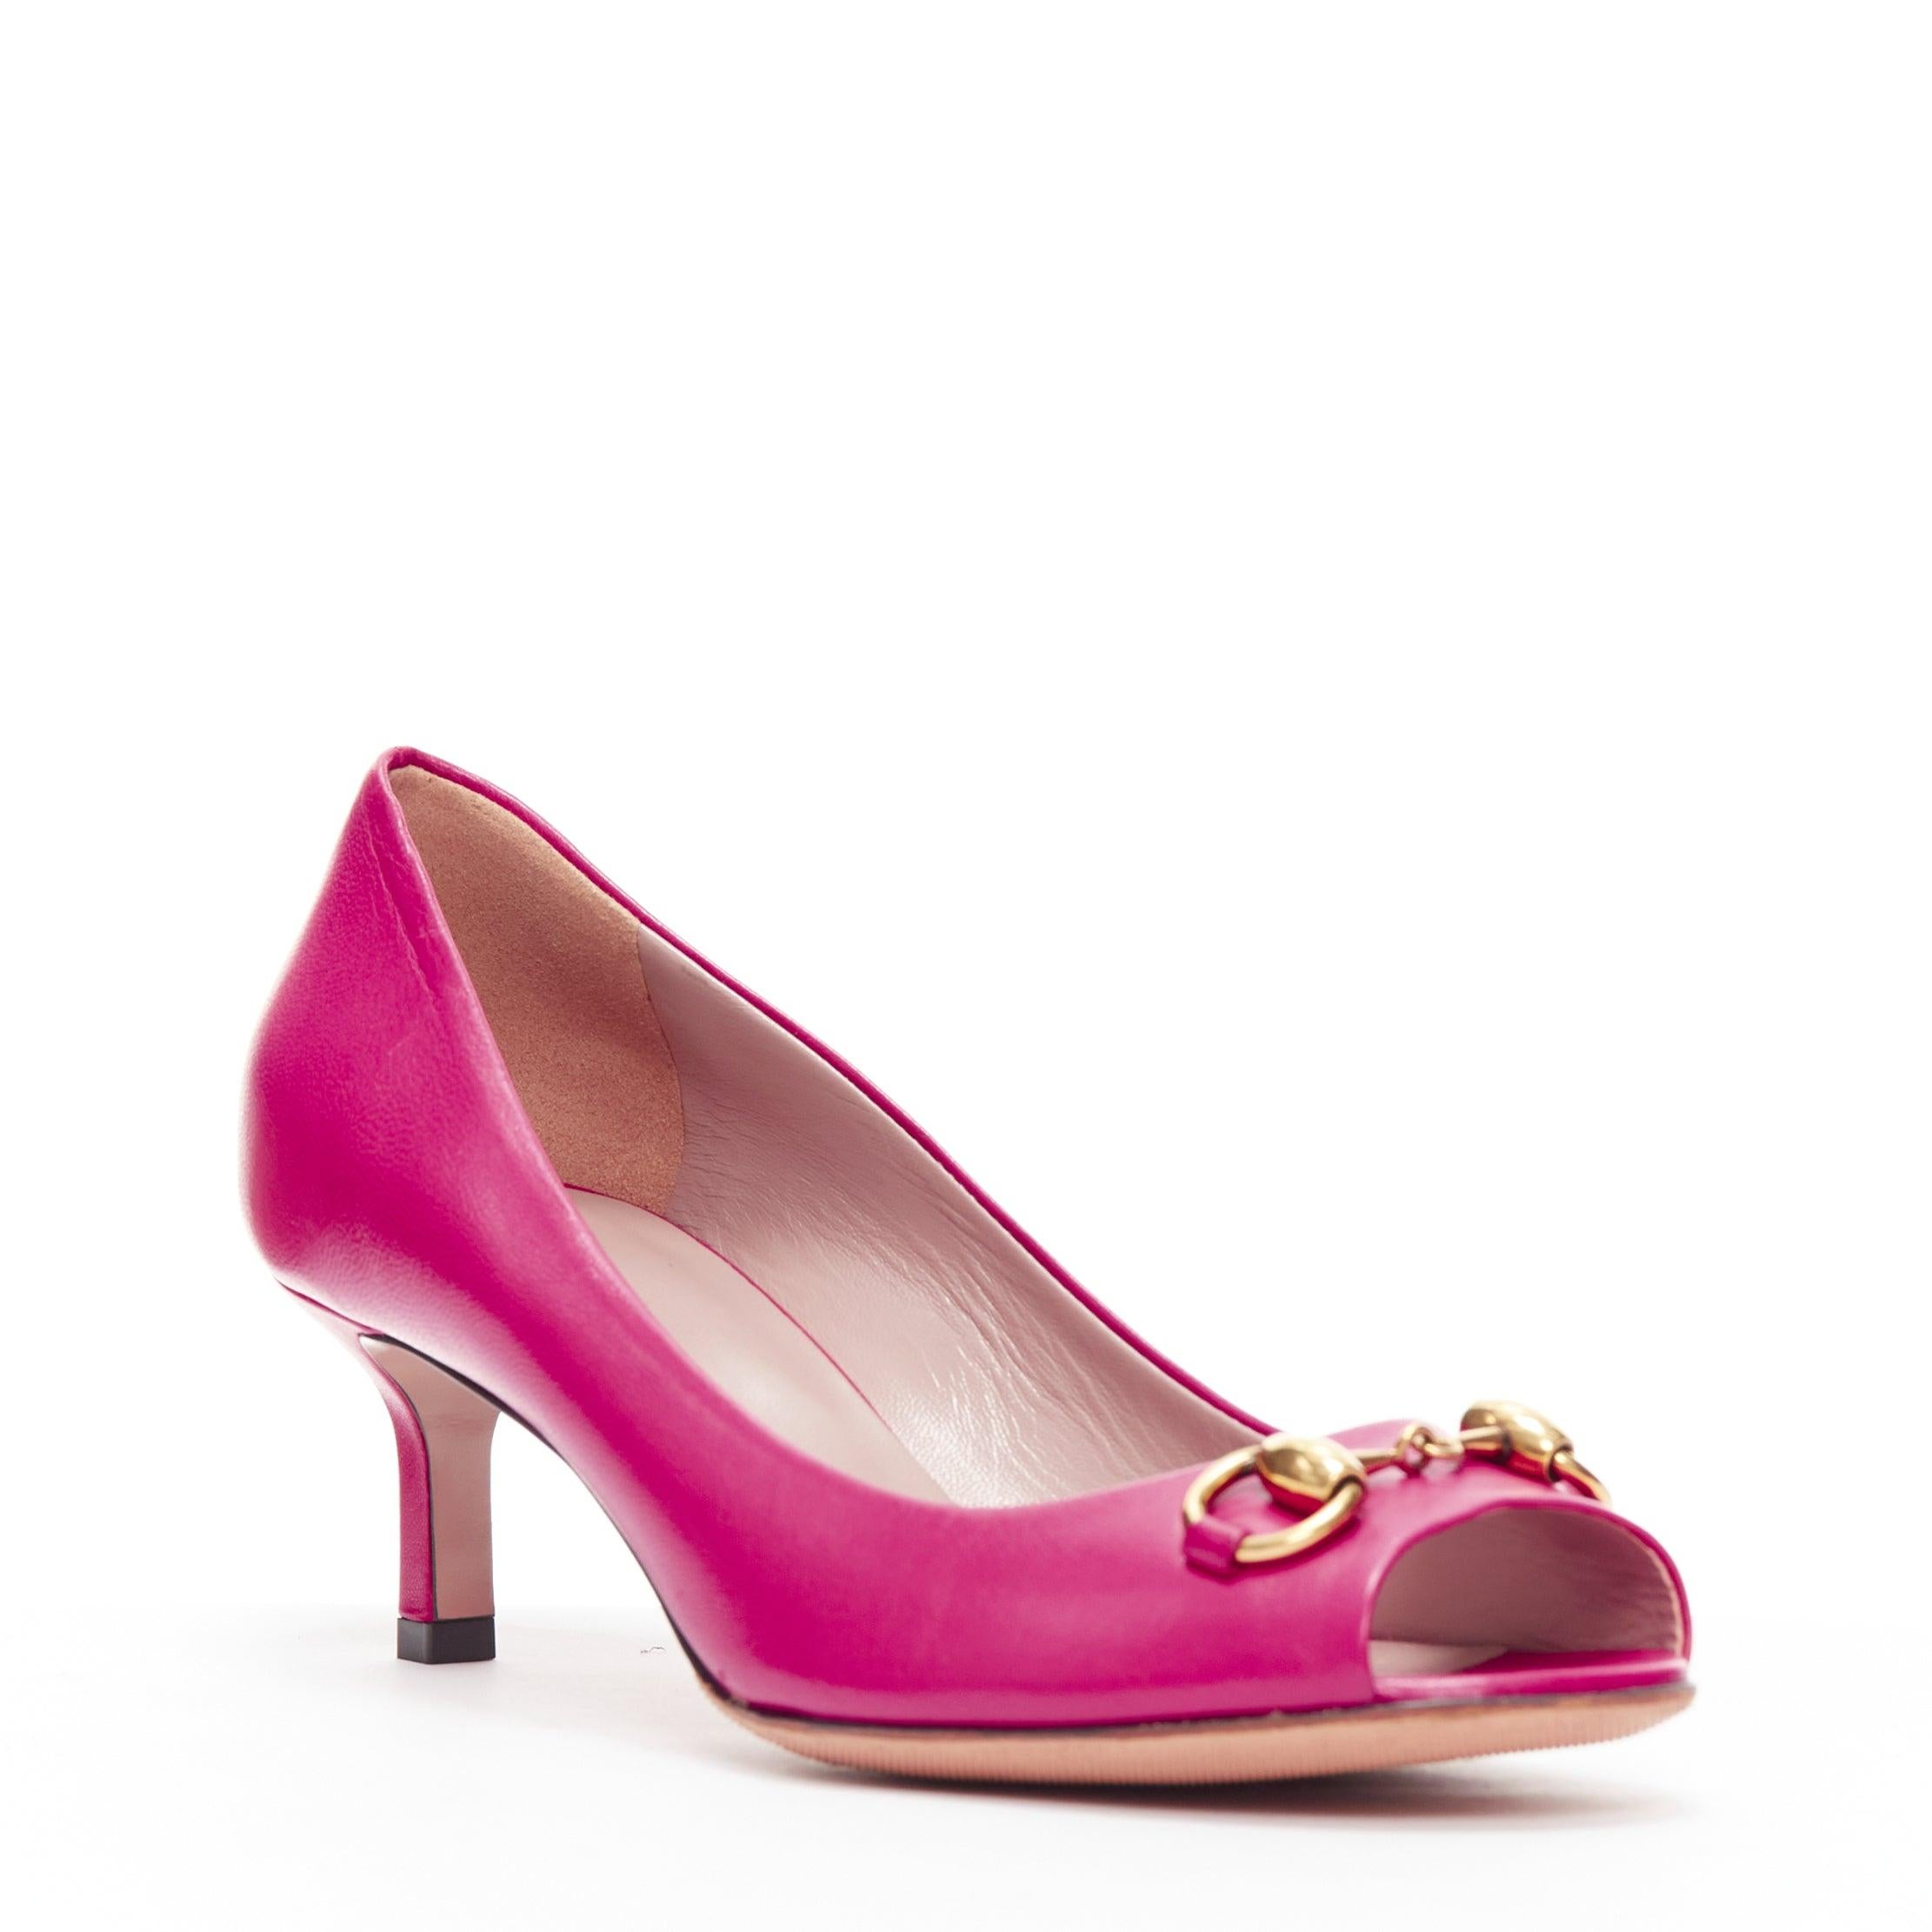 GUCCI Vintage fuschia pink gold horsebut peep toe kitten heel EU36
Reference: CELG/A00365
Brand: Gucci
Material: Leather, Metal
Color: Pink, Gold
Pattern: Solid
Lining: Purple Leather
Extra Details: Gold-tone horsebit hardware.
Made in: